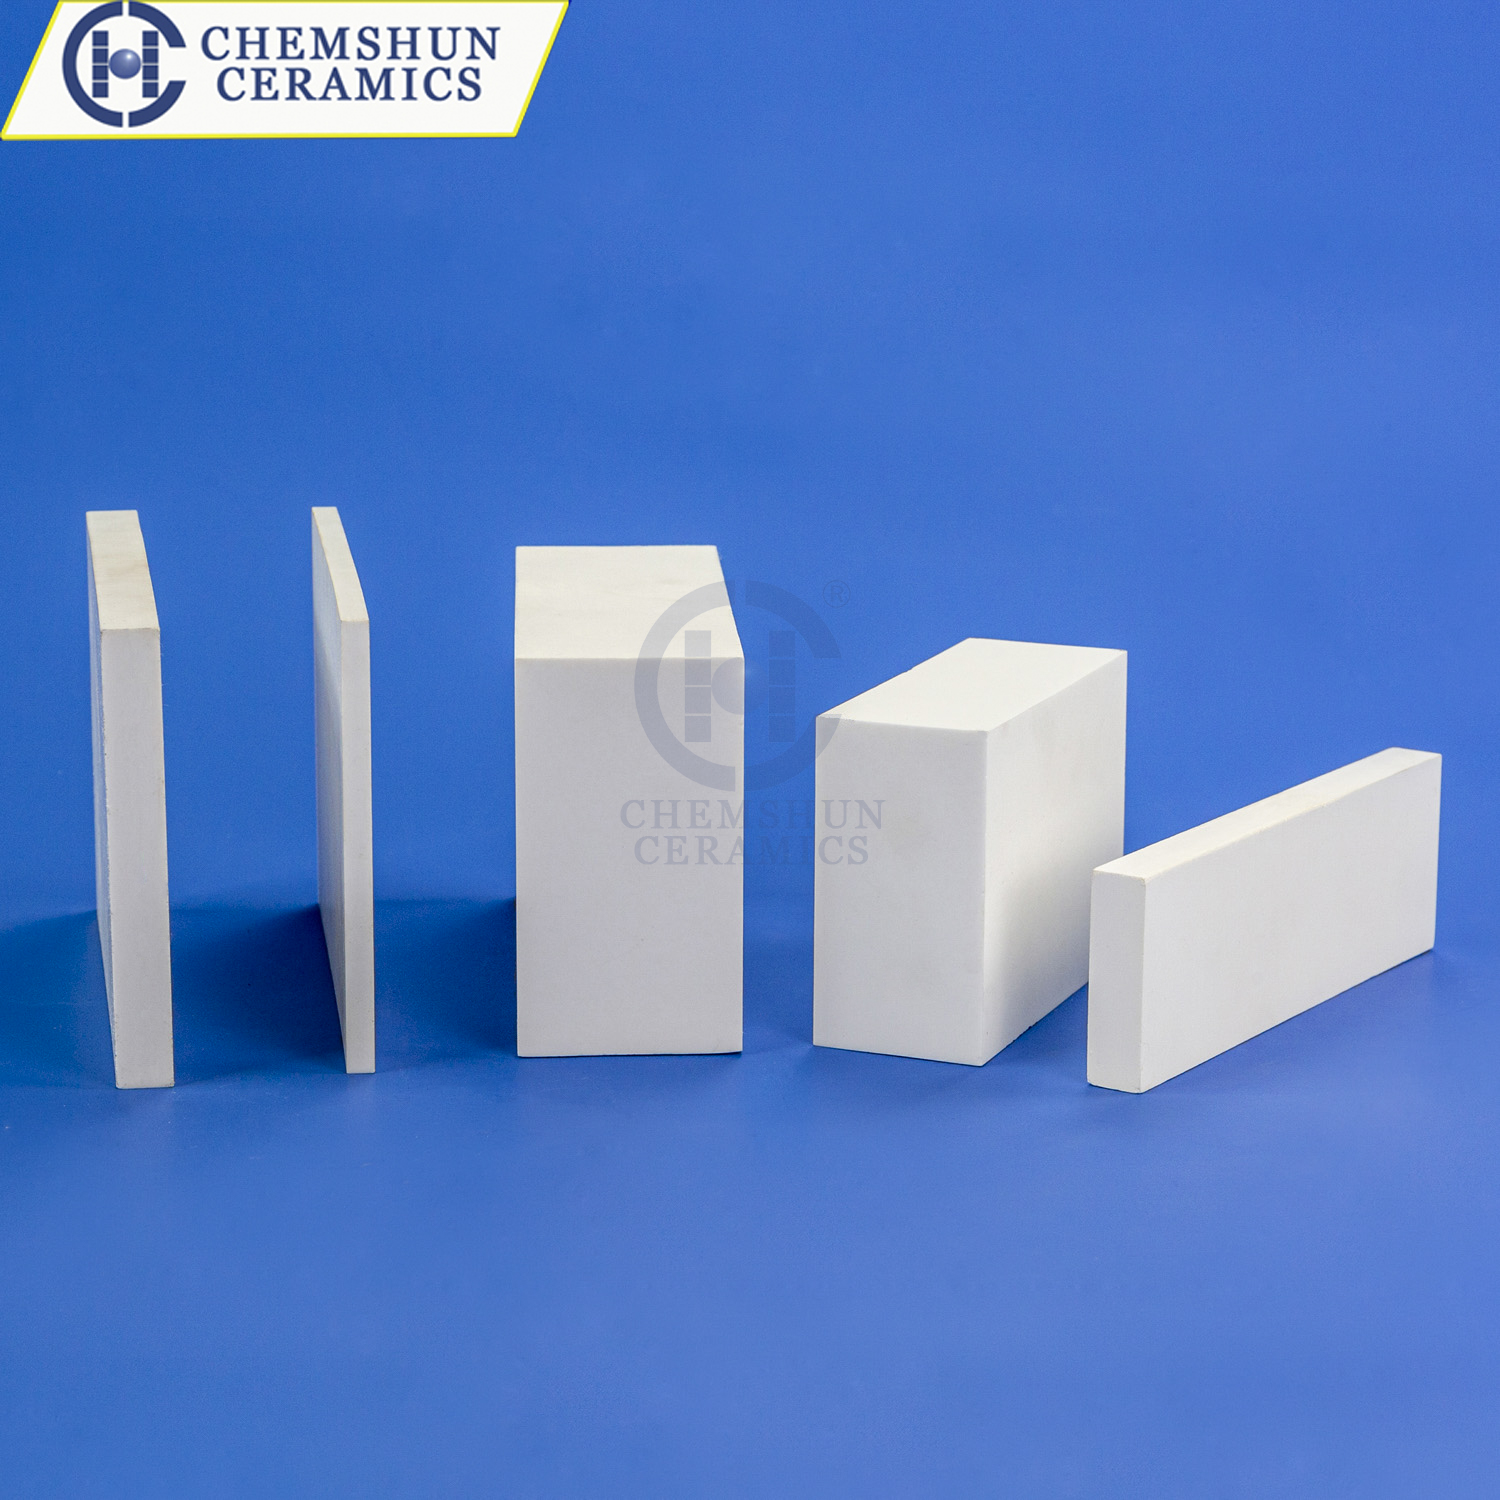 The Reasons to choose alumina ceramic wear liners for wear protection